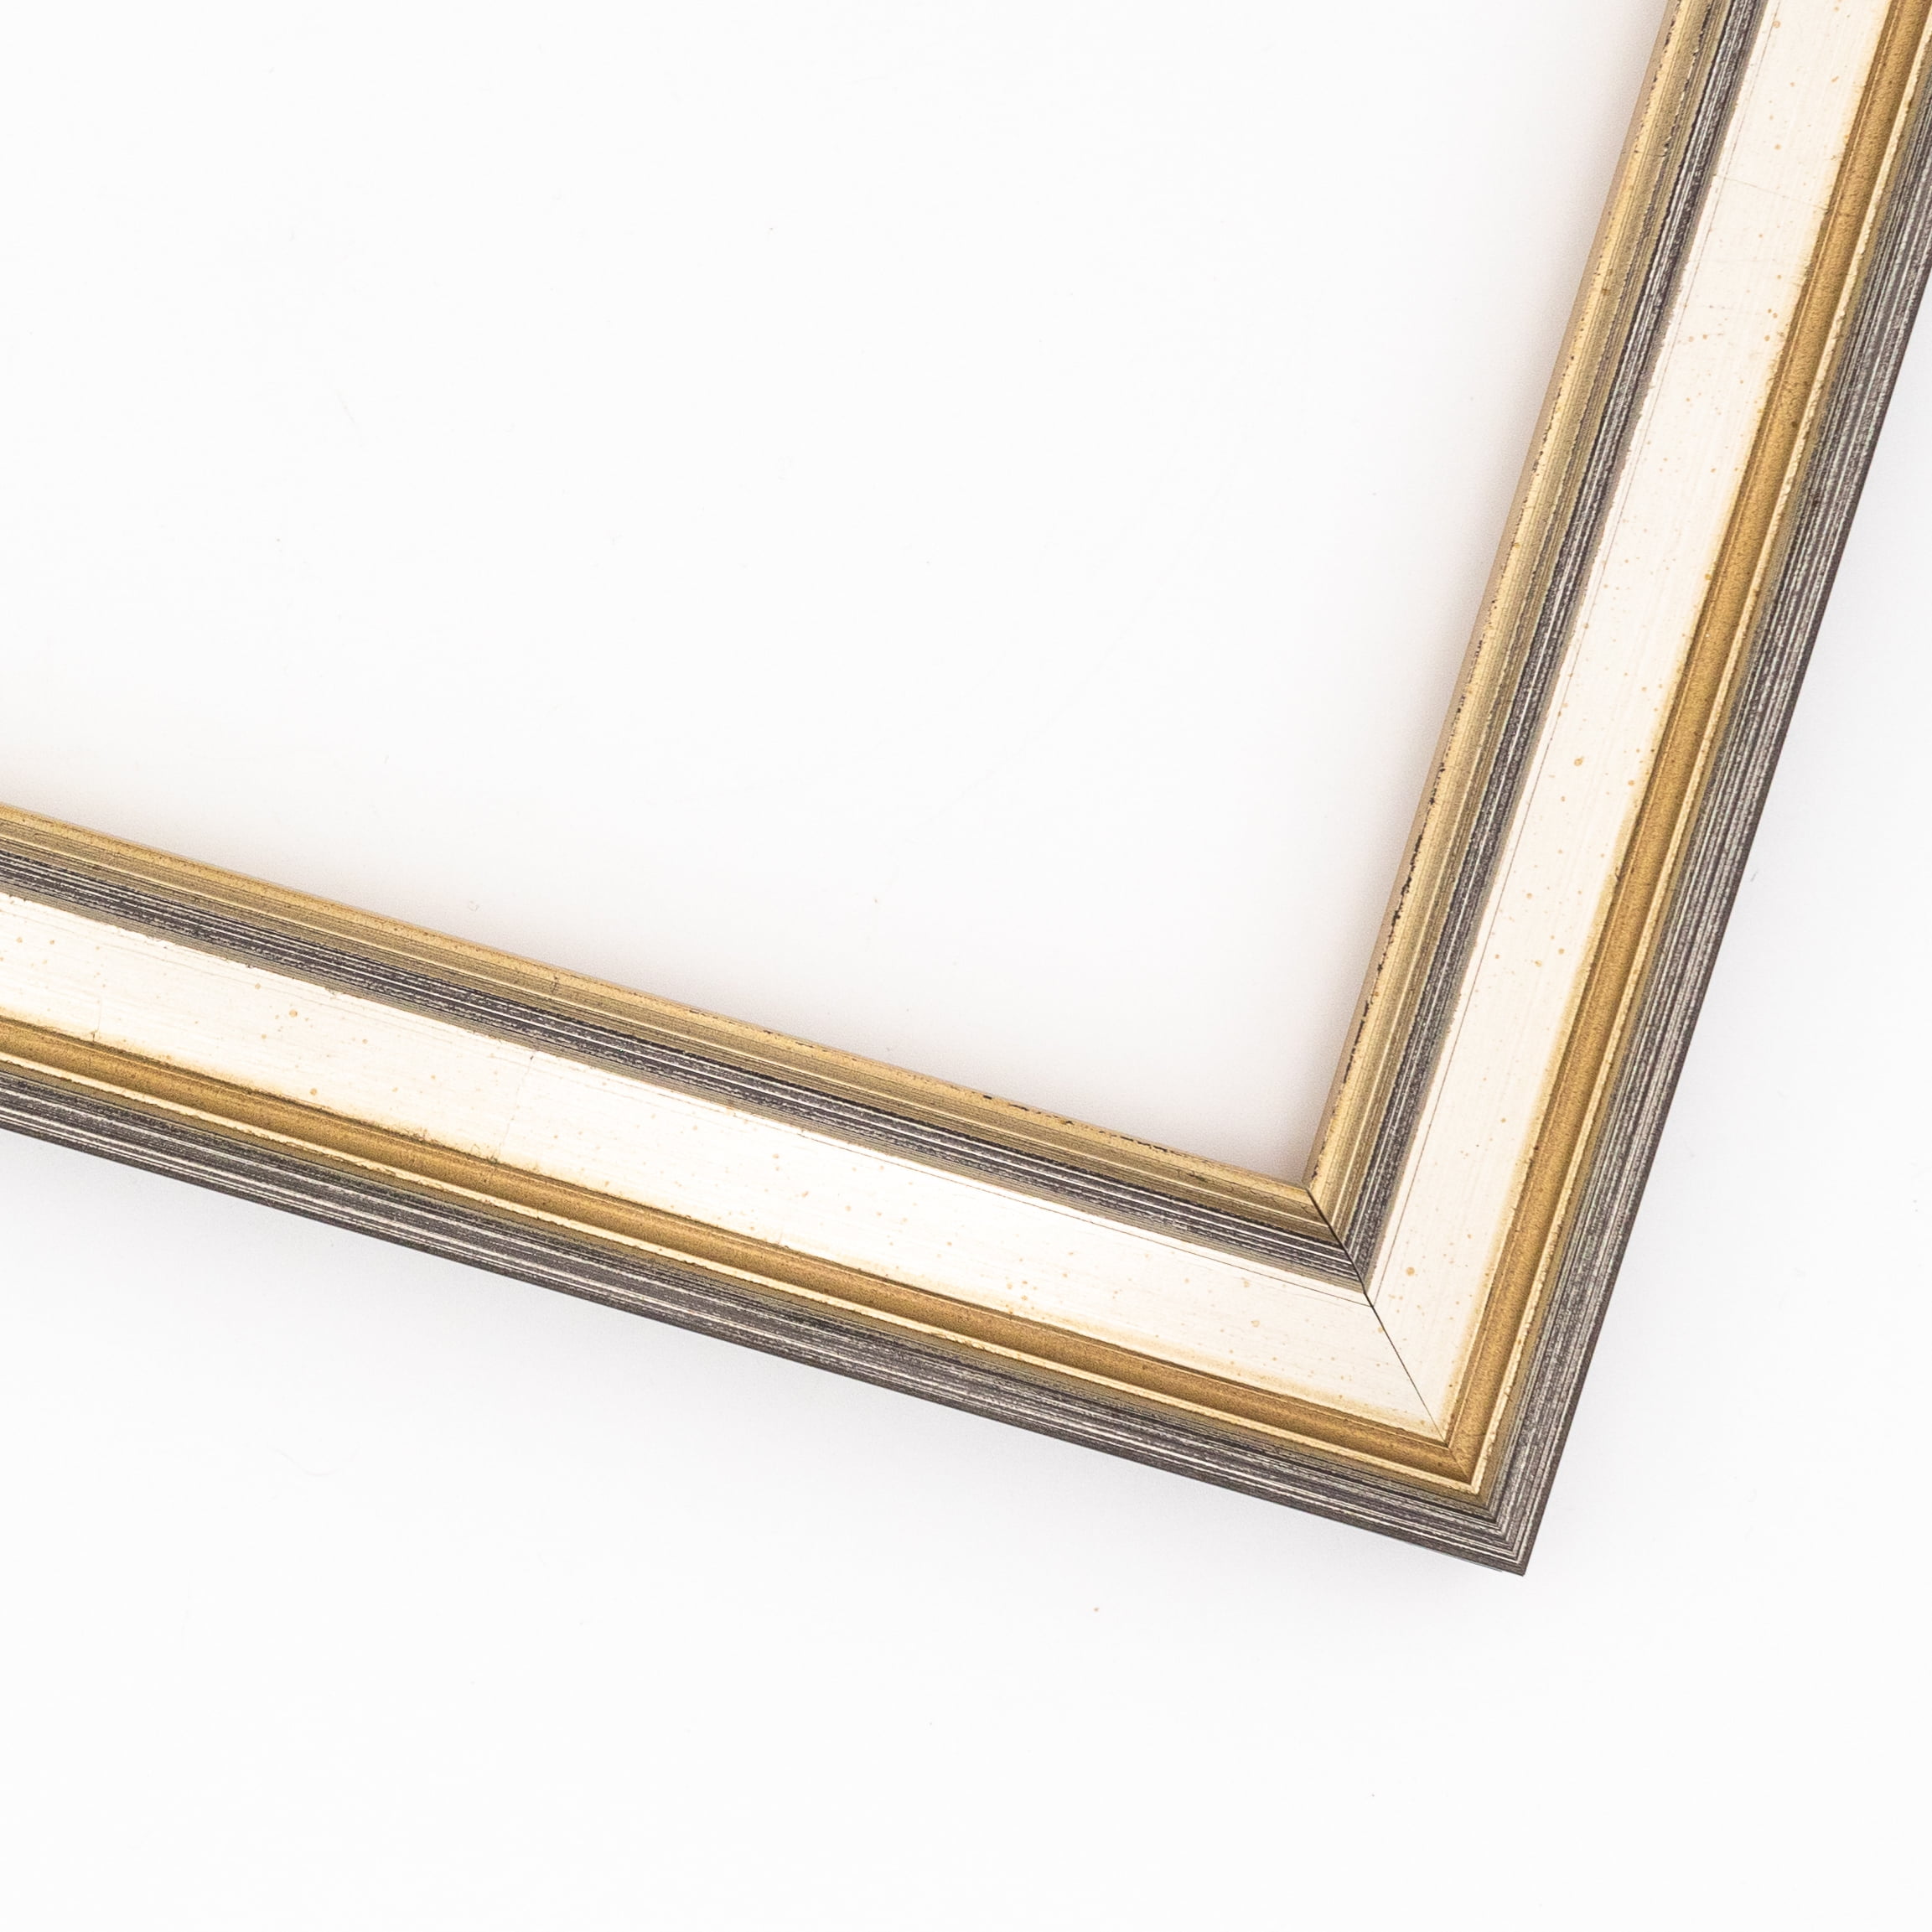 Gold Manhattan Wood Picture Frames 70cm x 50cm Kwik Picture Framing 